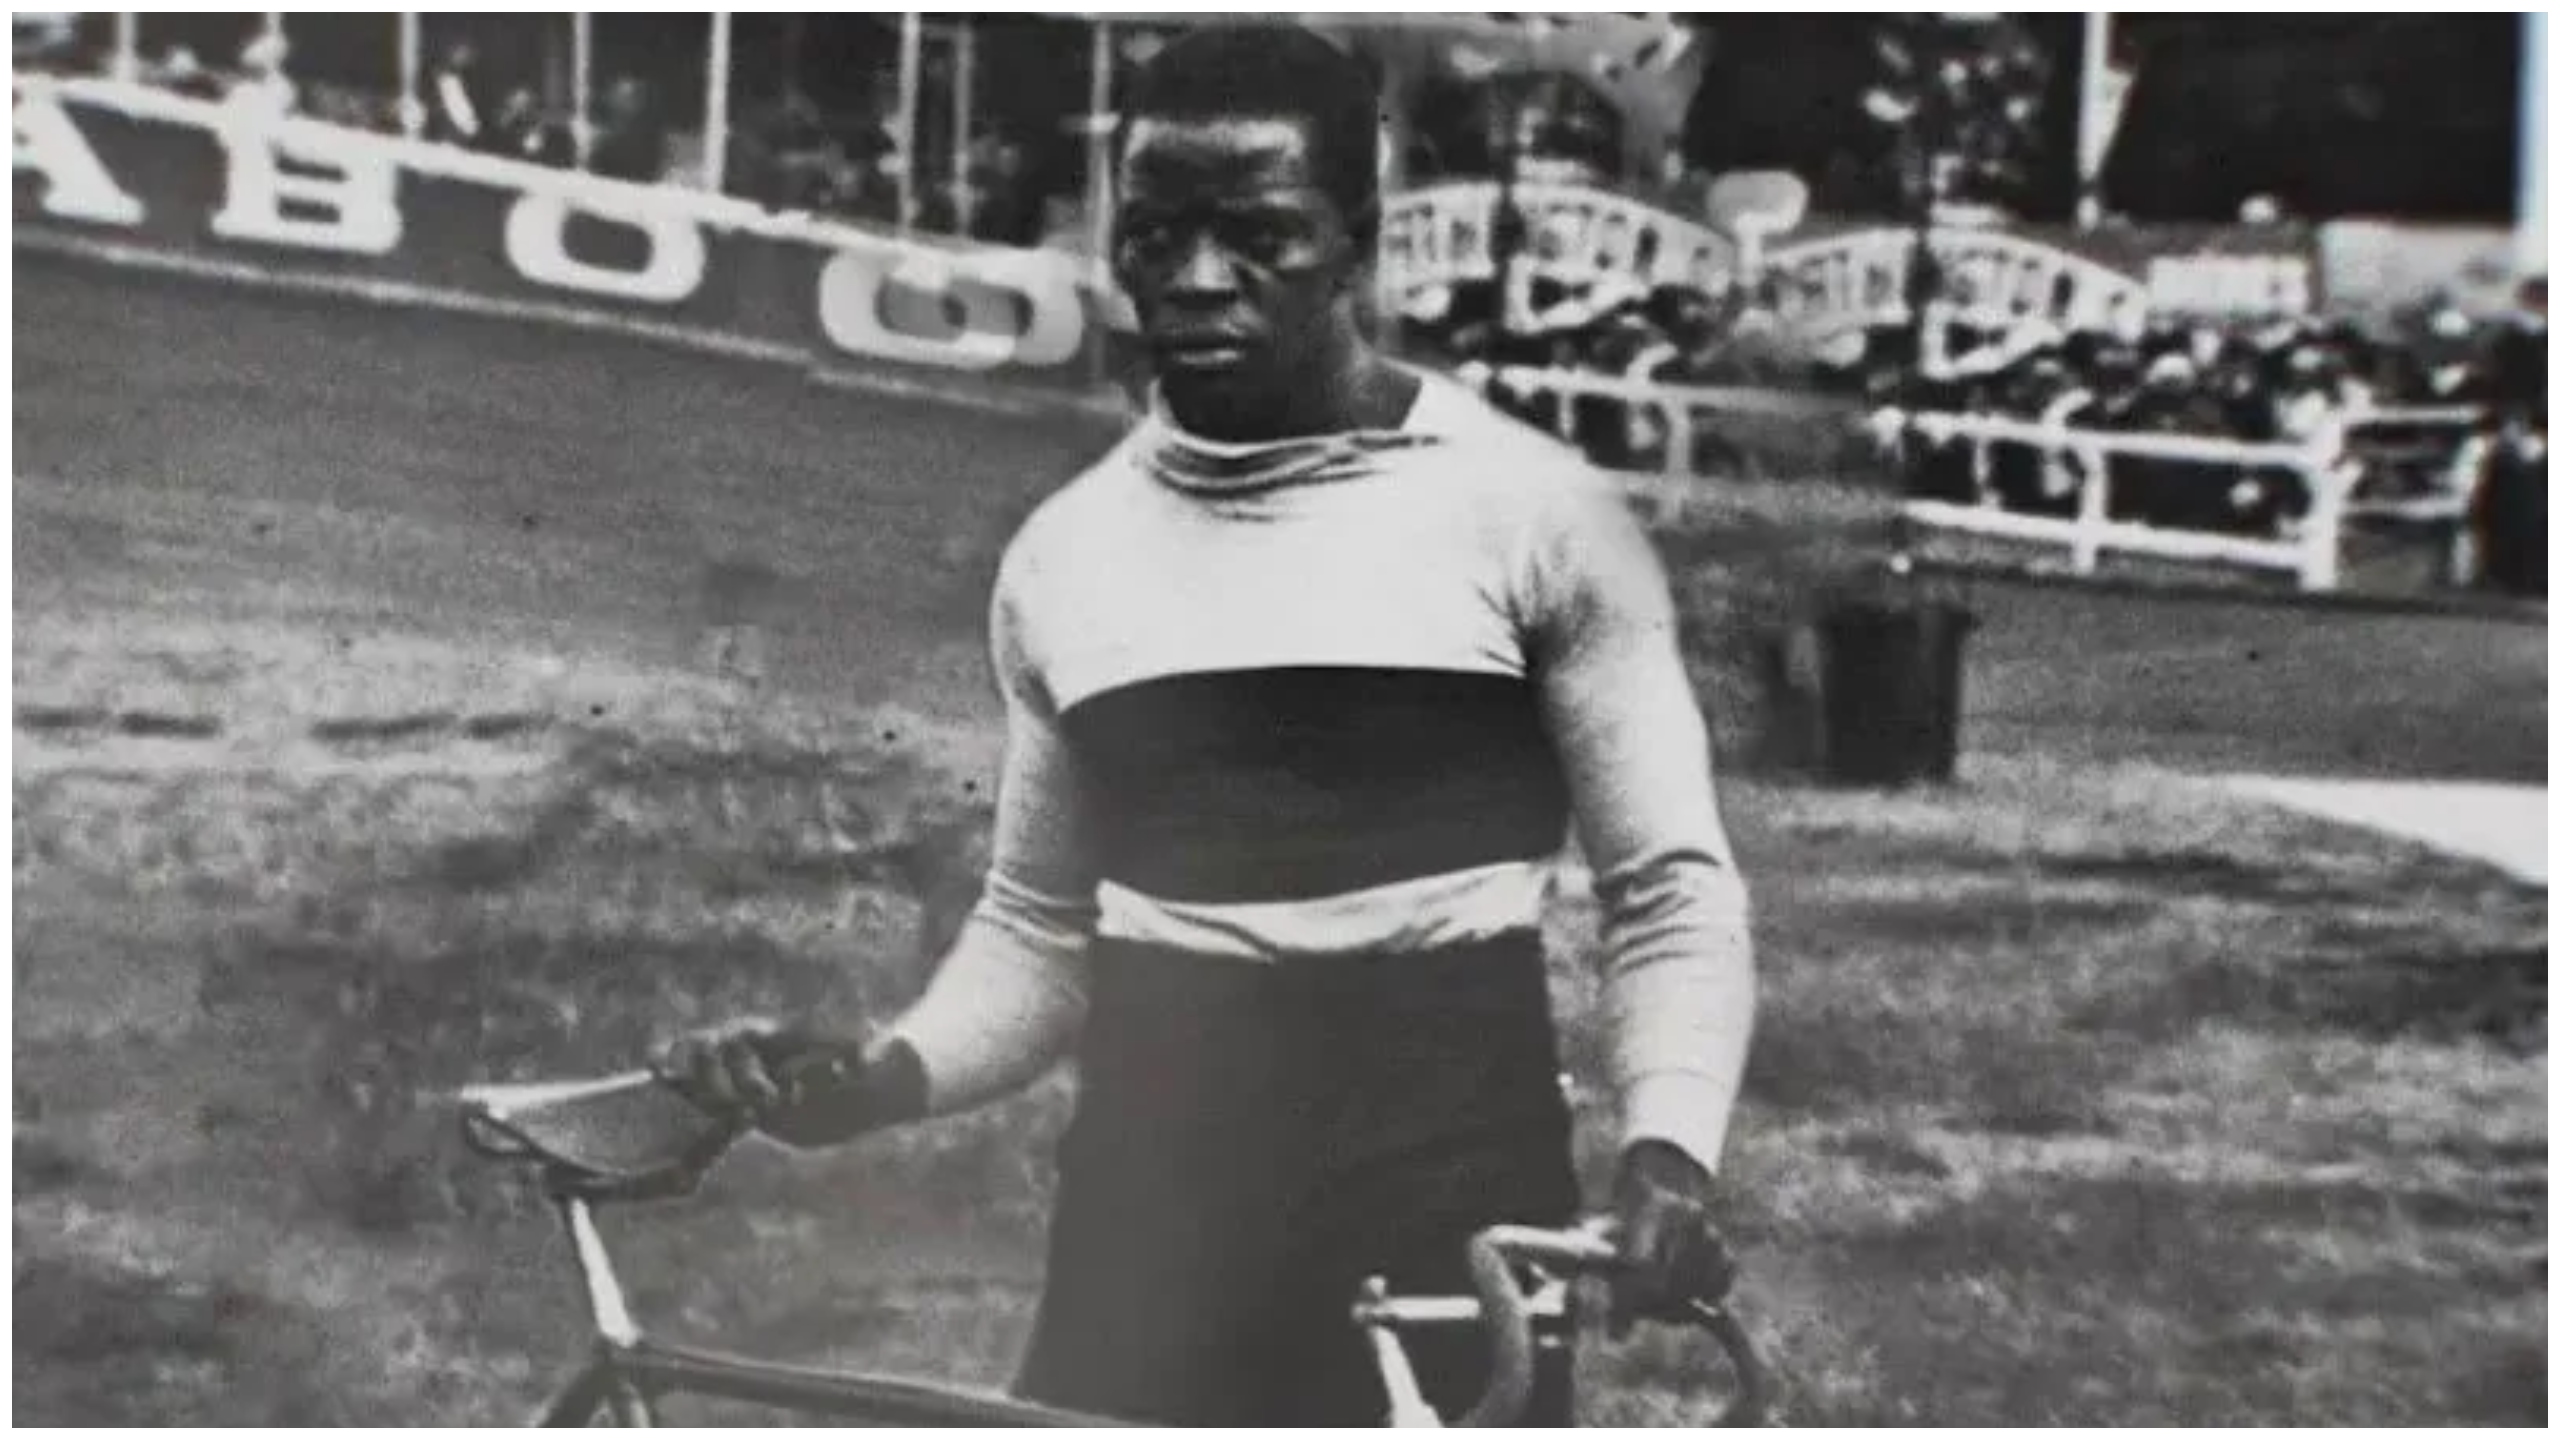 Meet Cyclist Marshall “Major” Taylor The First Black Athlete To Become A Global Superstar